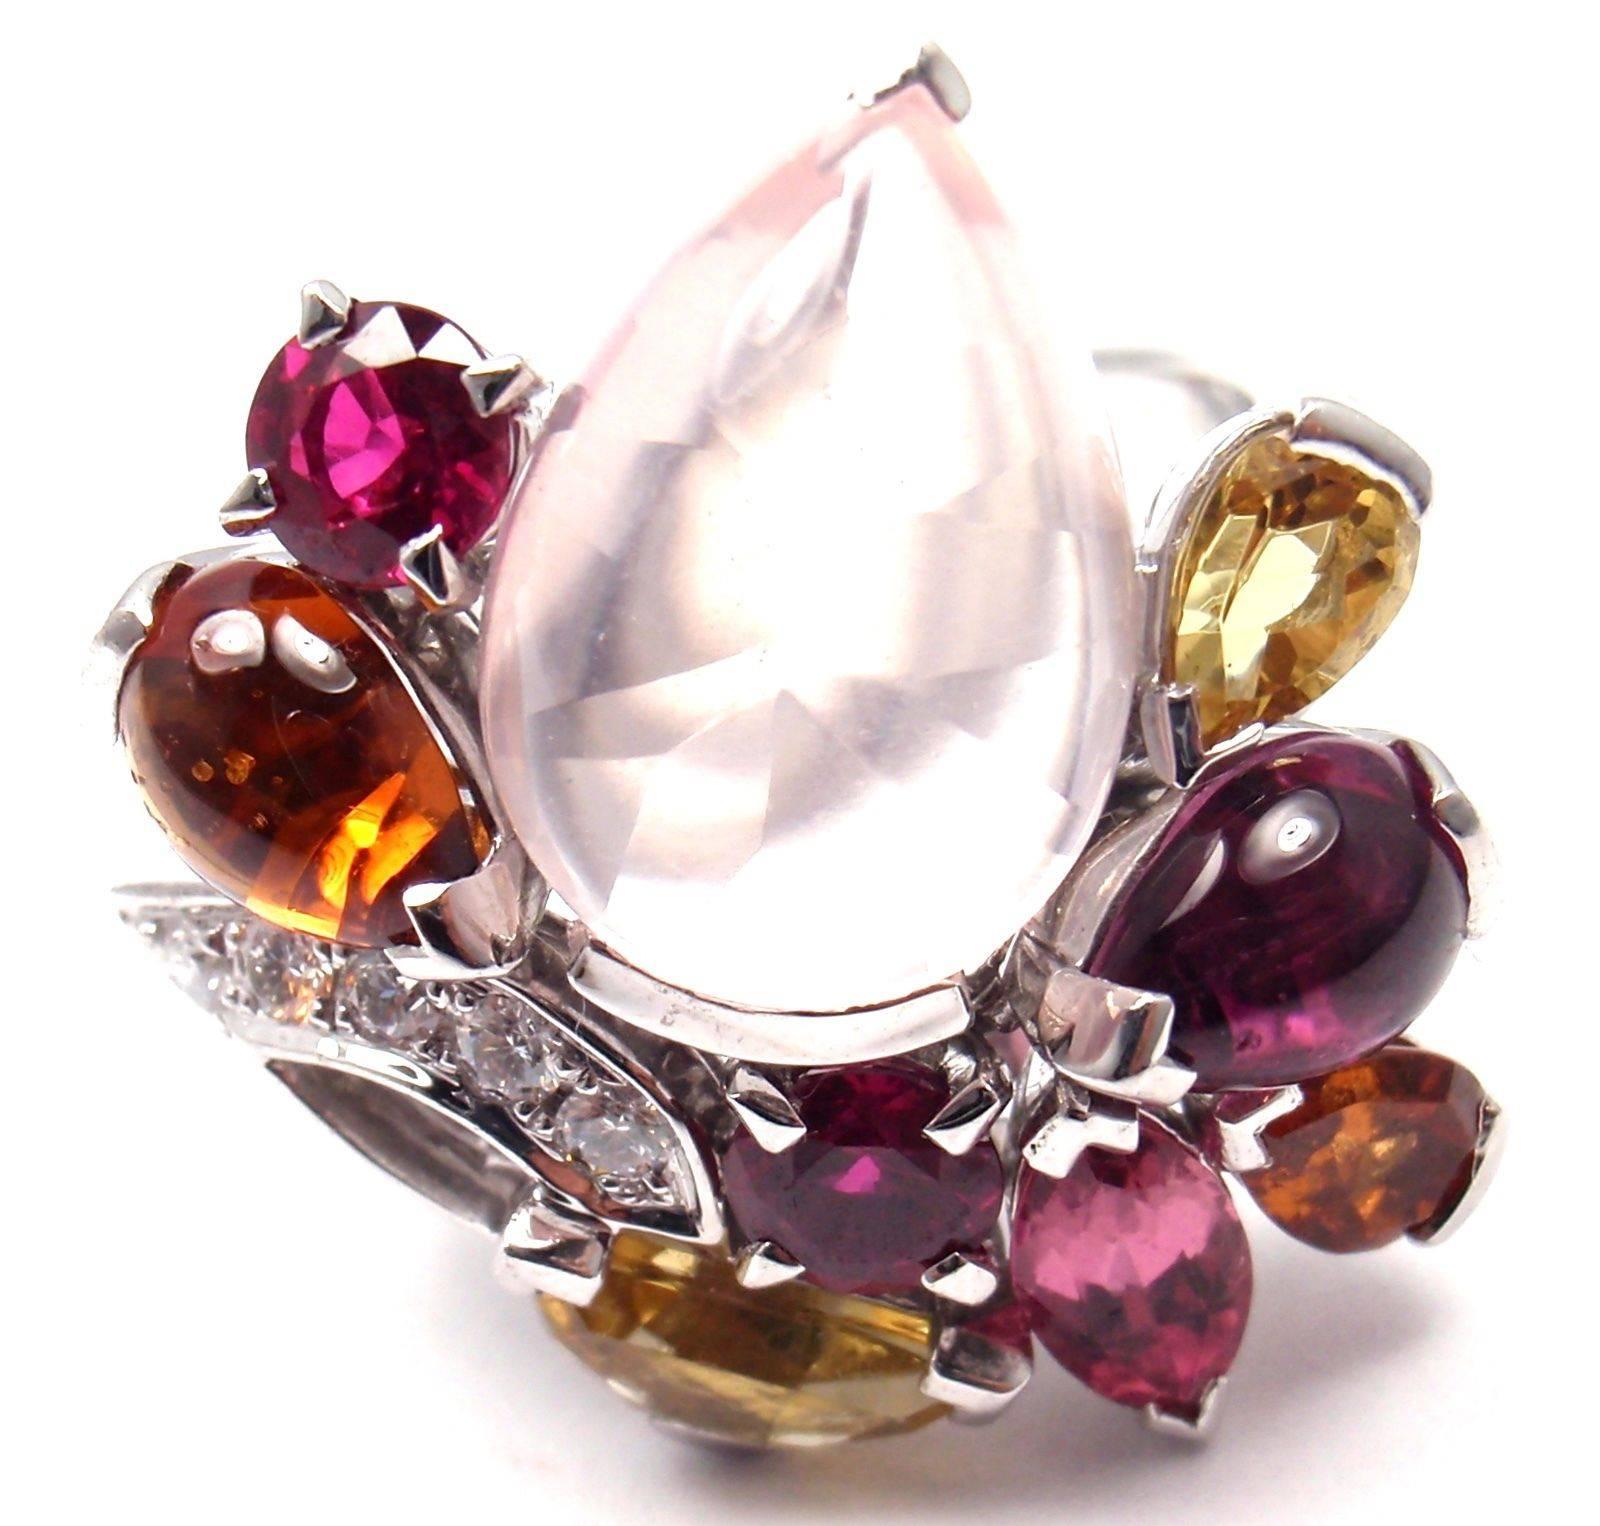 18k White Gold Diamond Pink Quartz Tourmaline Sorbet Ring by Cartier. 
With 1 pear shape large pink quartz stone 15mm x 10mm

 9 round brilliant cut diamonds VVS1 clarity, G color total weight approx. .25ct

Sapphire, Ruby and Tourmaline
This ring